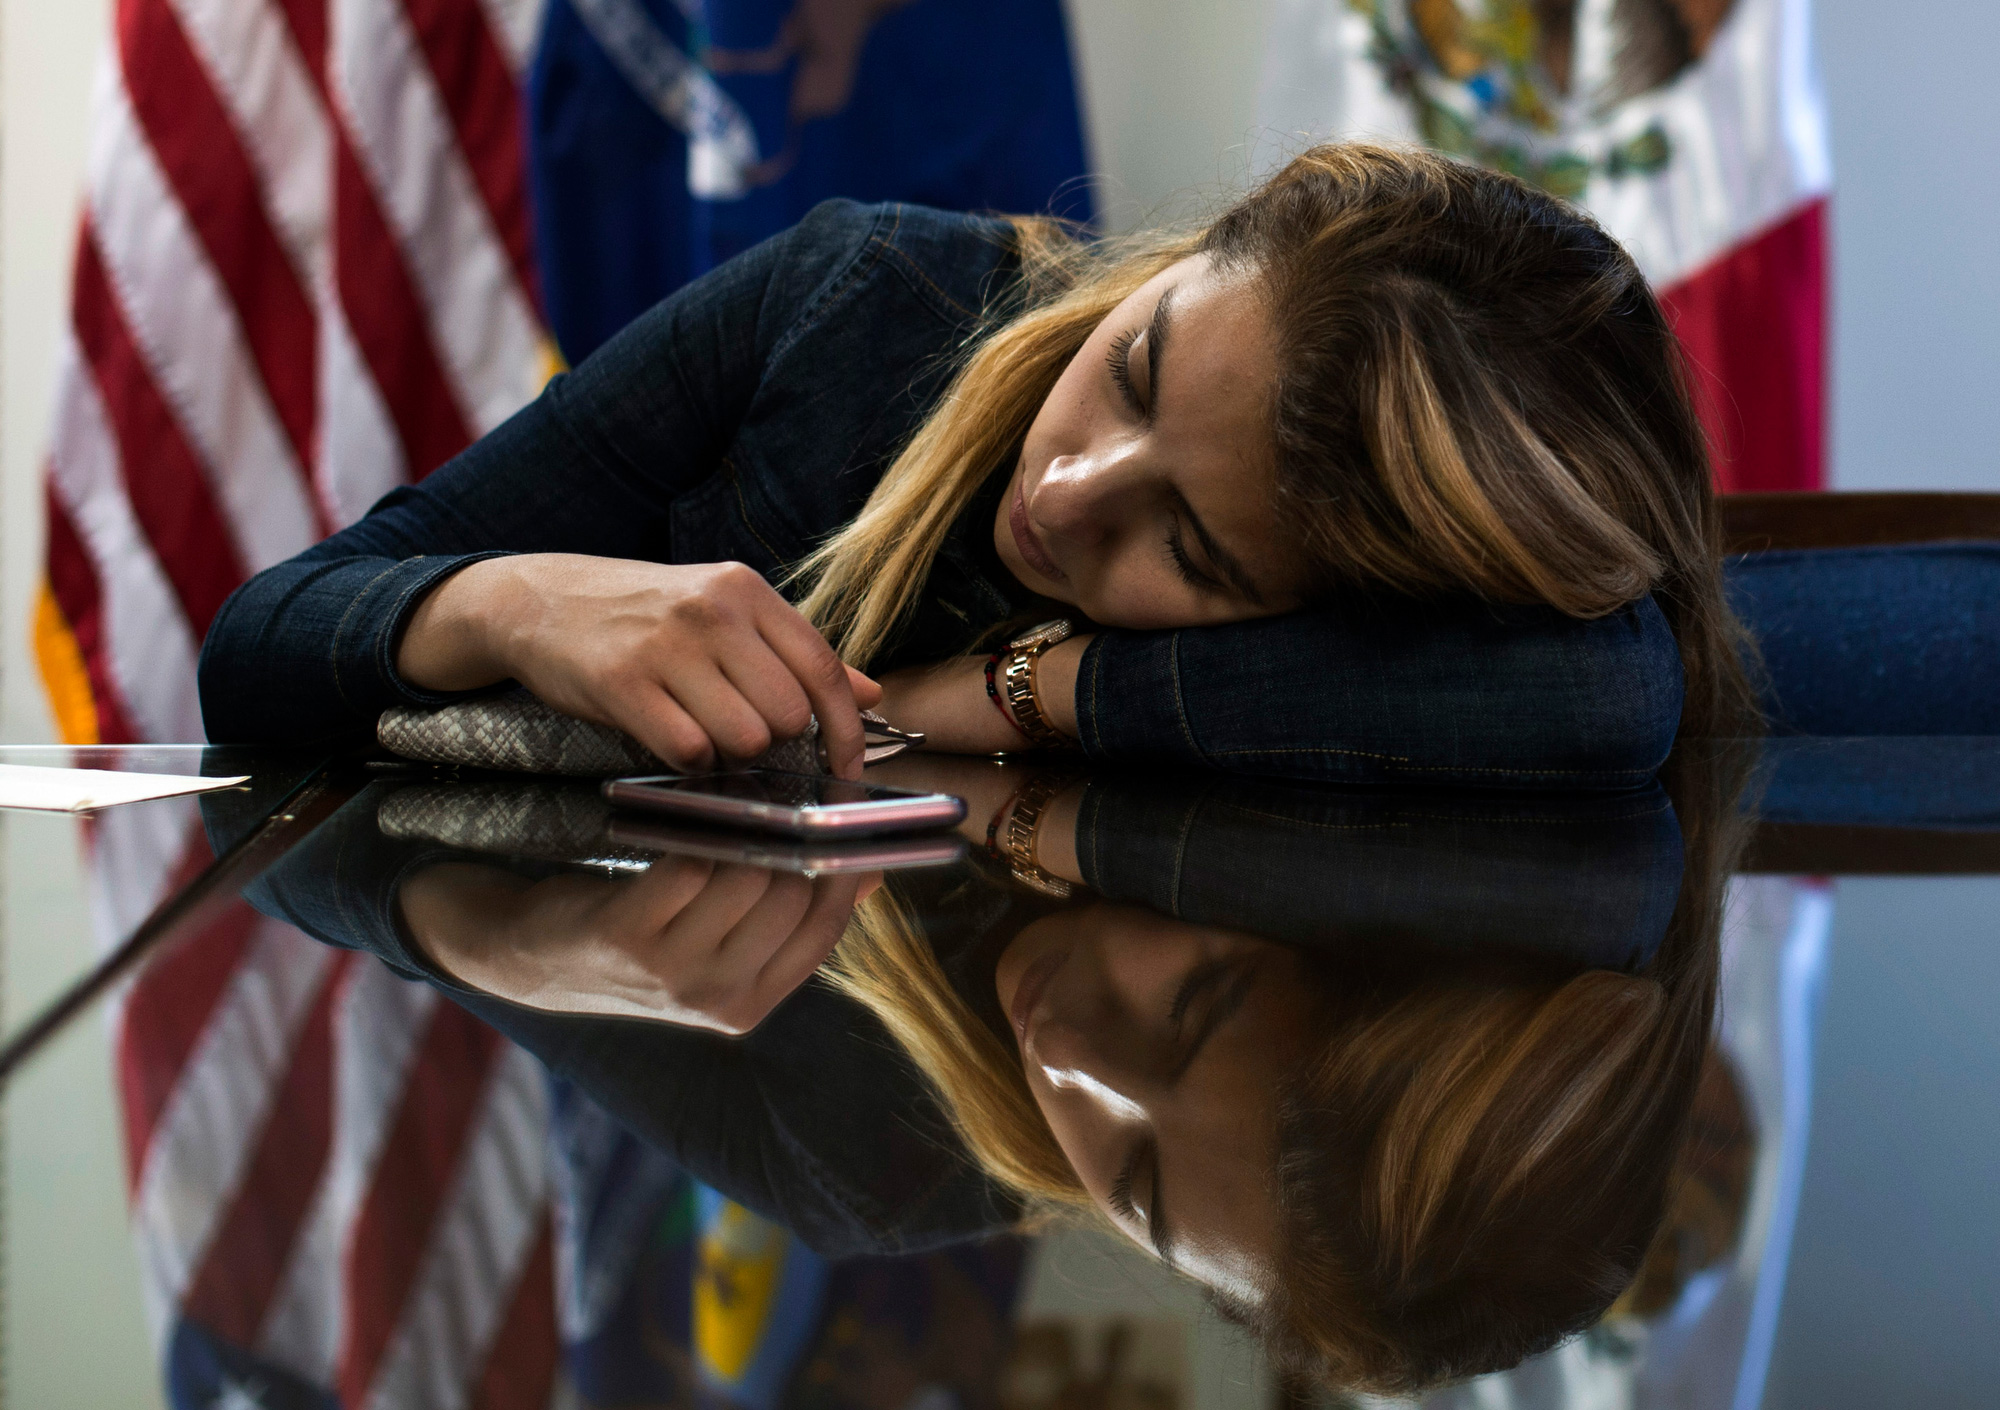 This photograph shows a young woman (Pamela) with her head on her arm resting on a table. She wears a dark denim shirt and looks down at her phone on the table. Behind her, three flags hang from flagpoles. The surface of the table is highly glossy, reflecting Pamela’s image and the flags.